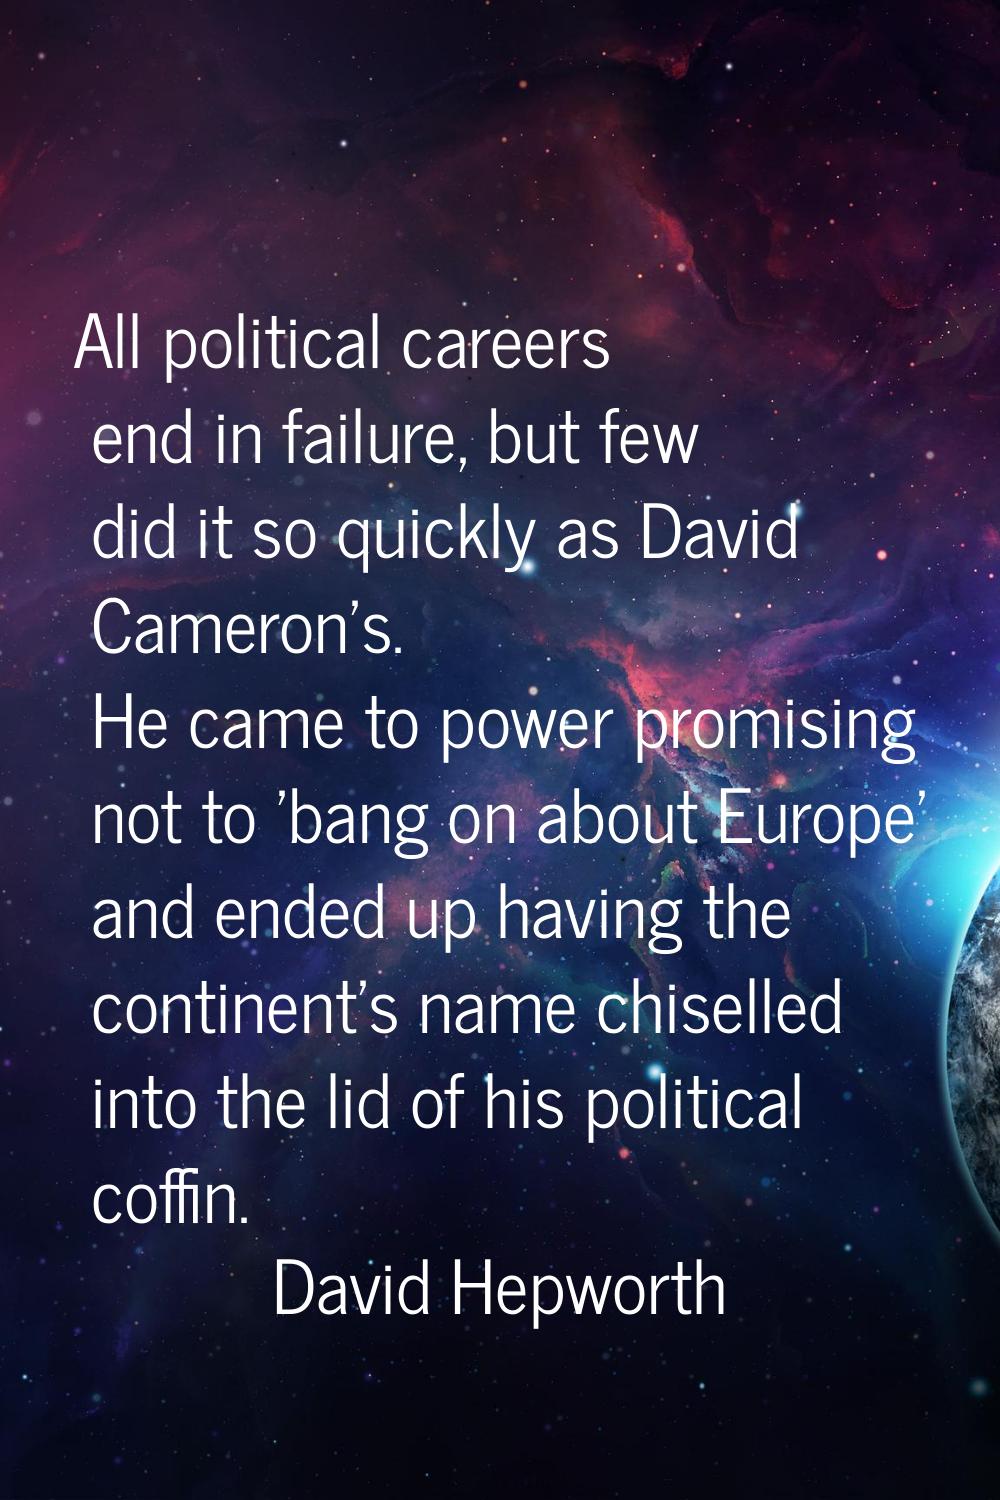 All political careers end in failure, but few did it so quickly as David Cameron's. He came to powe